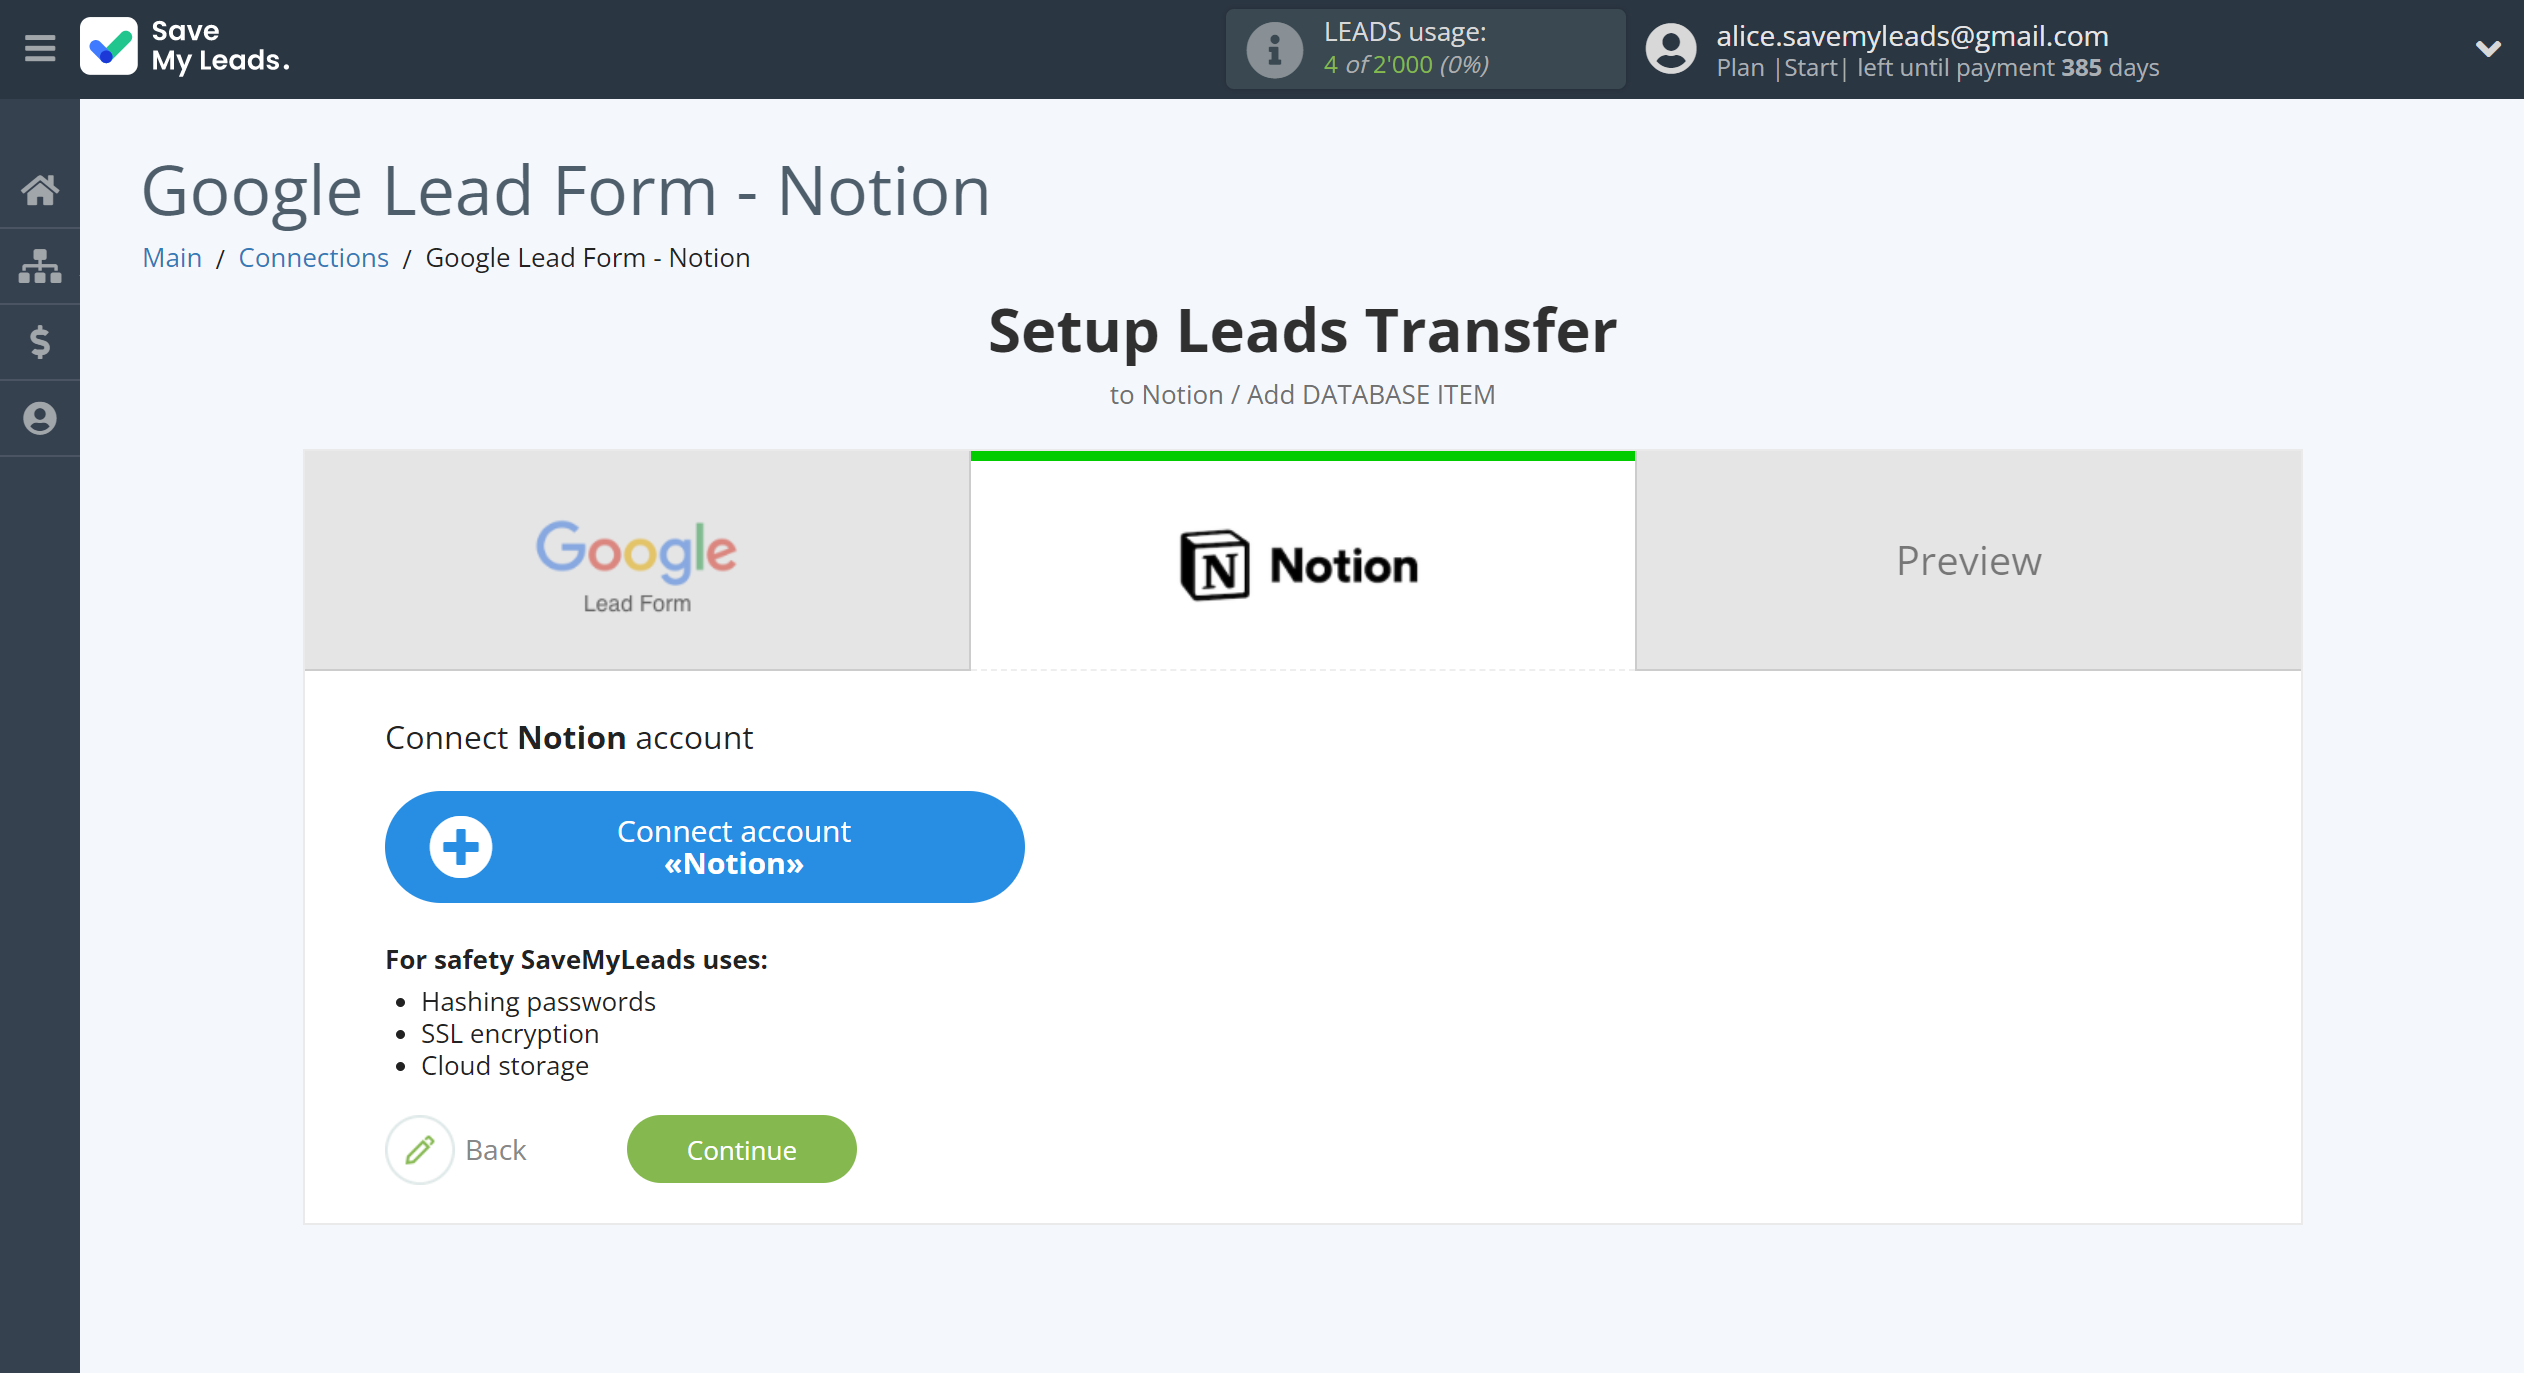 How to Connect Google Lead Form with Notion | Data Destination account connection